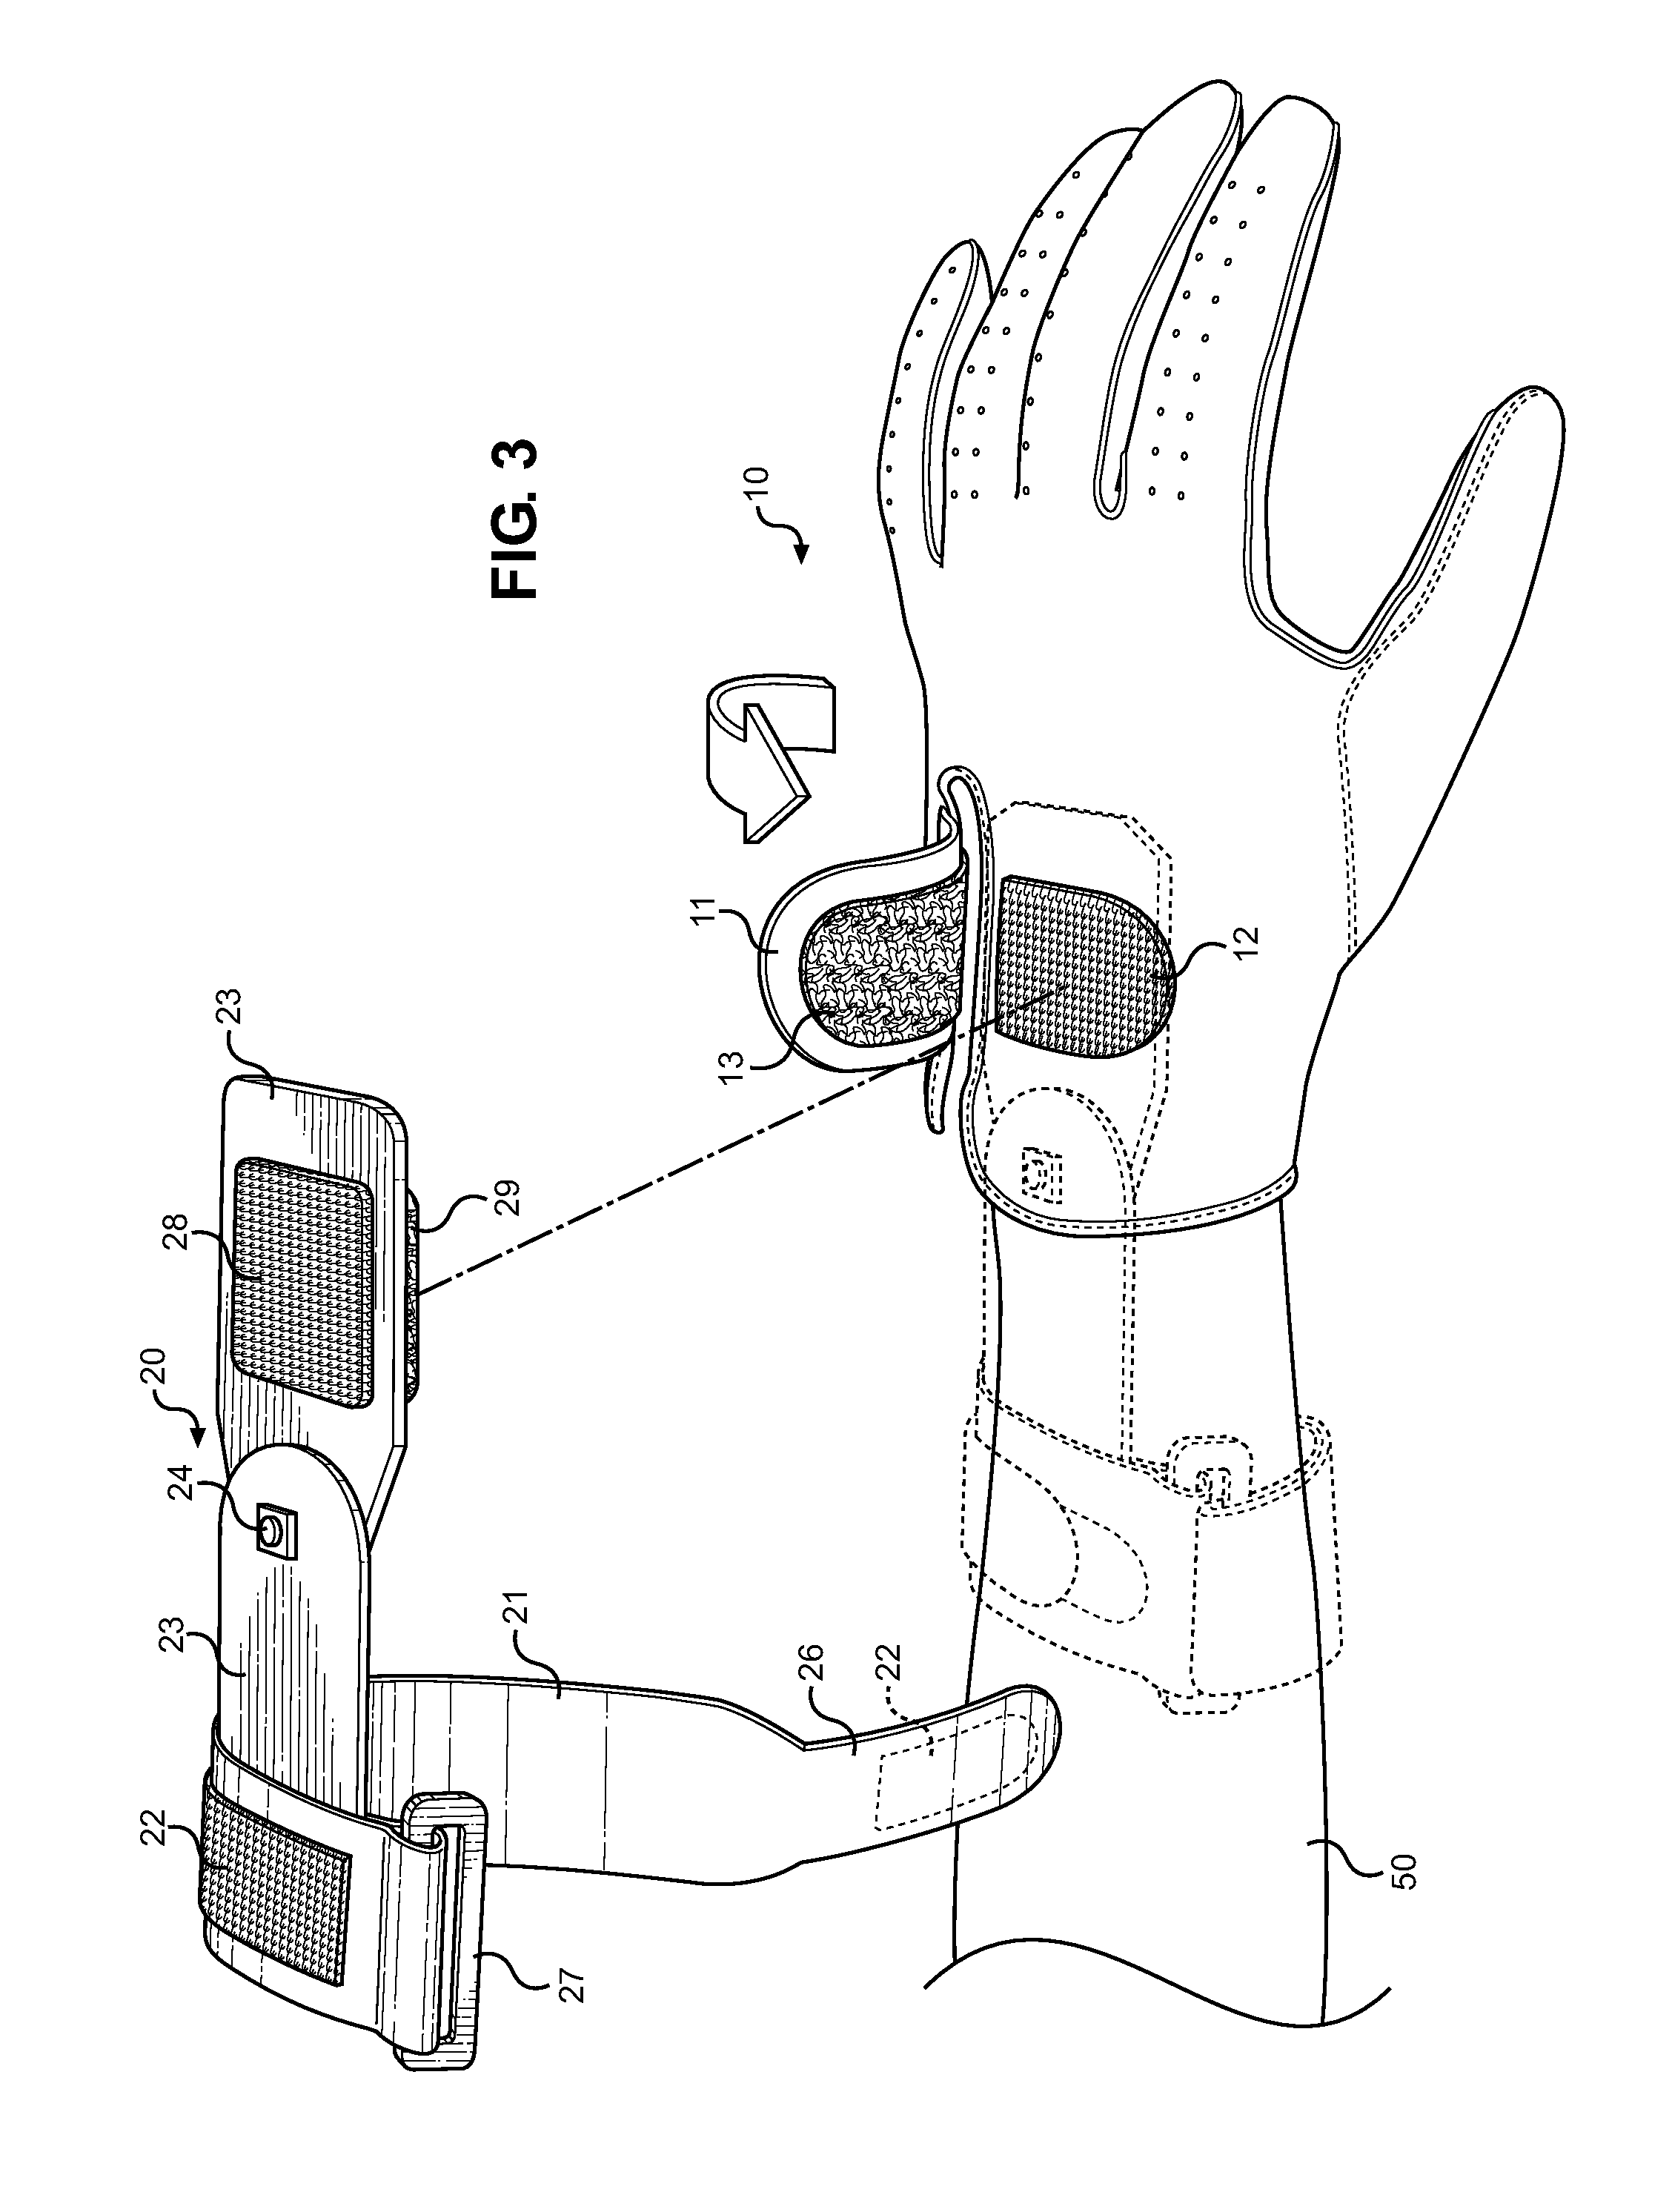 Wrist Training Device for a Golf Swing and Putting Stroke